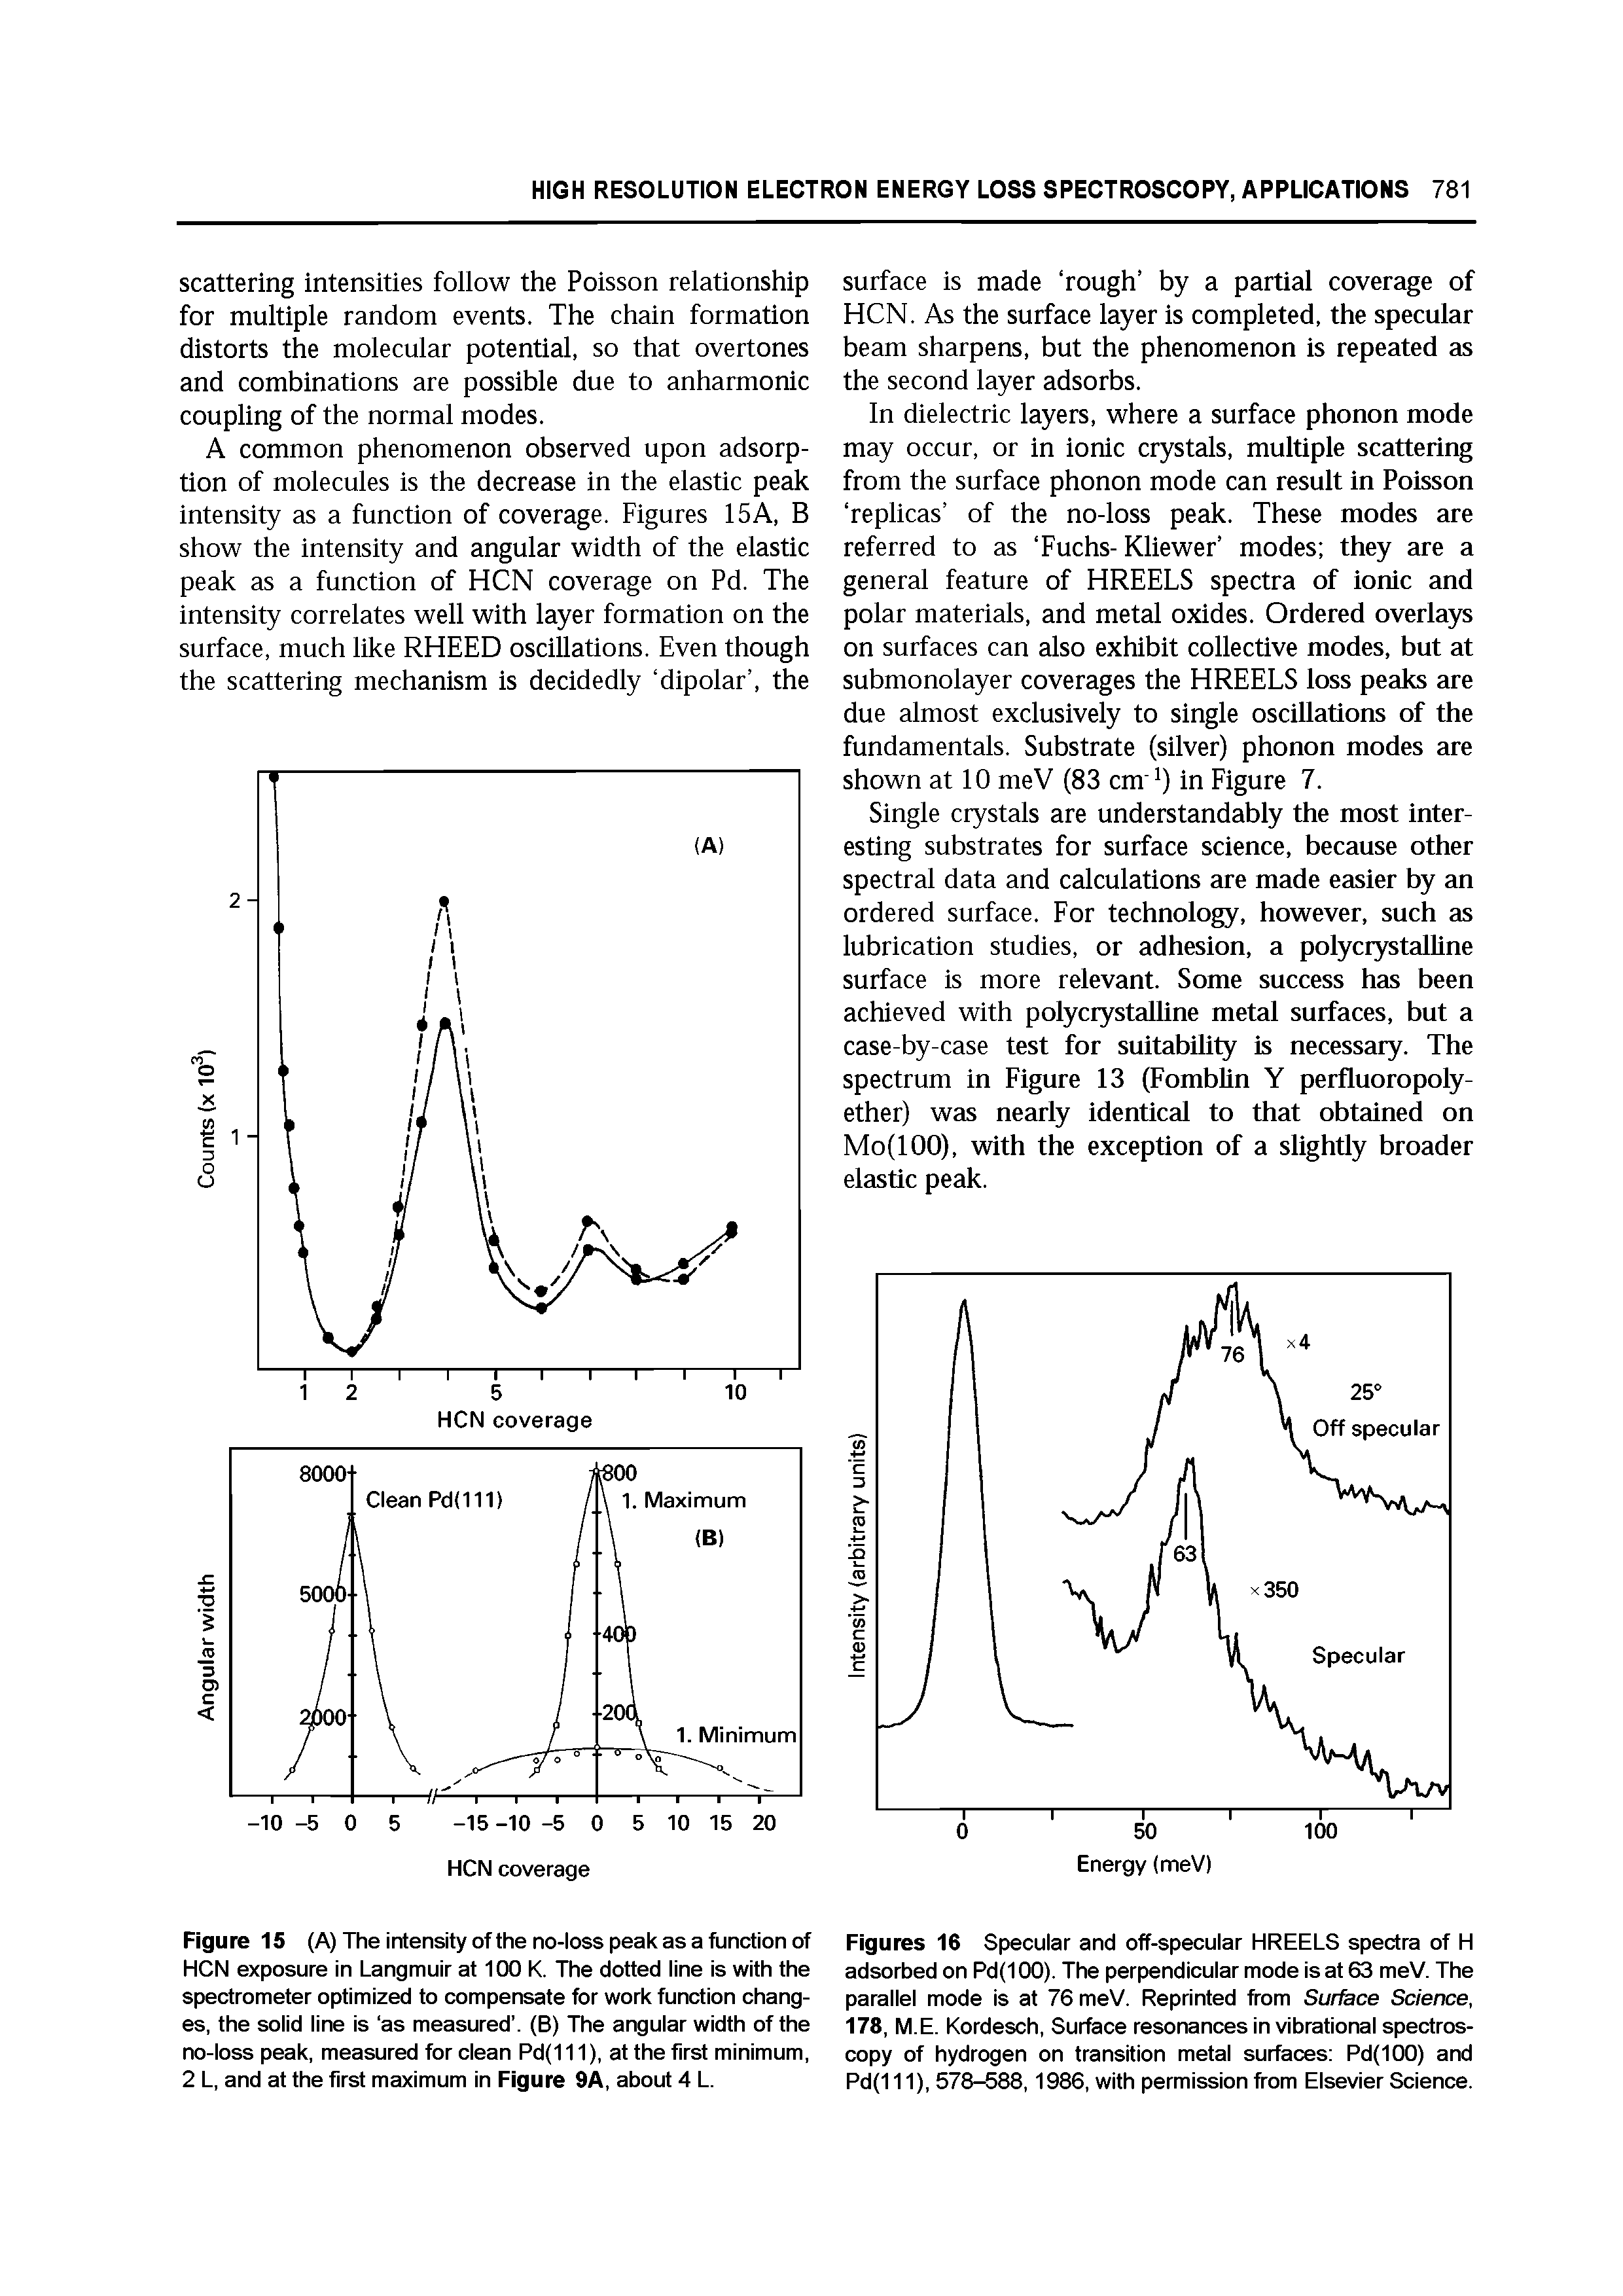 Figures 1 Specular and off-specular HREELS spectra of H adsorbed on Pd(100). The perpendicular mode is at 63 meV. The parallel mode is at 76 meV. Reprinted from Surface Science, 178, M.E. Kordesch, Surface resonances in vibrational spectroscopy of hydrogen on transition metal surfaces Pd(IOO) and Pd(111), 578-588,1986, with permission from Elsevier Science.